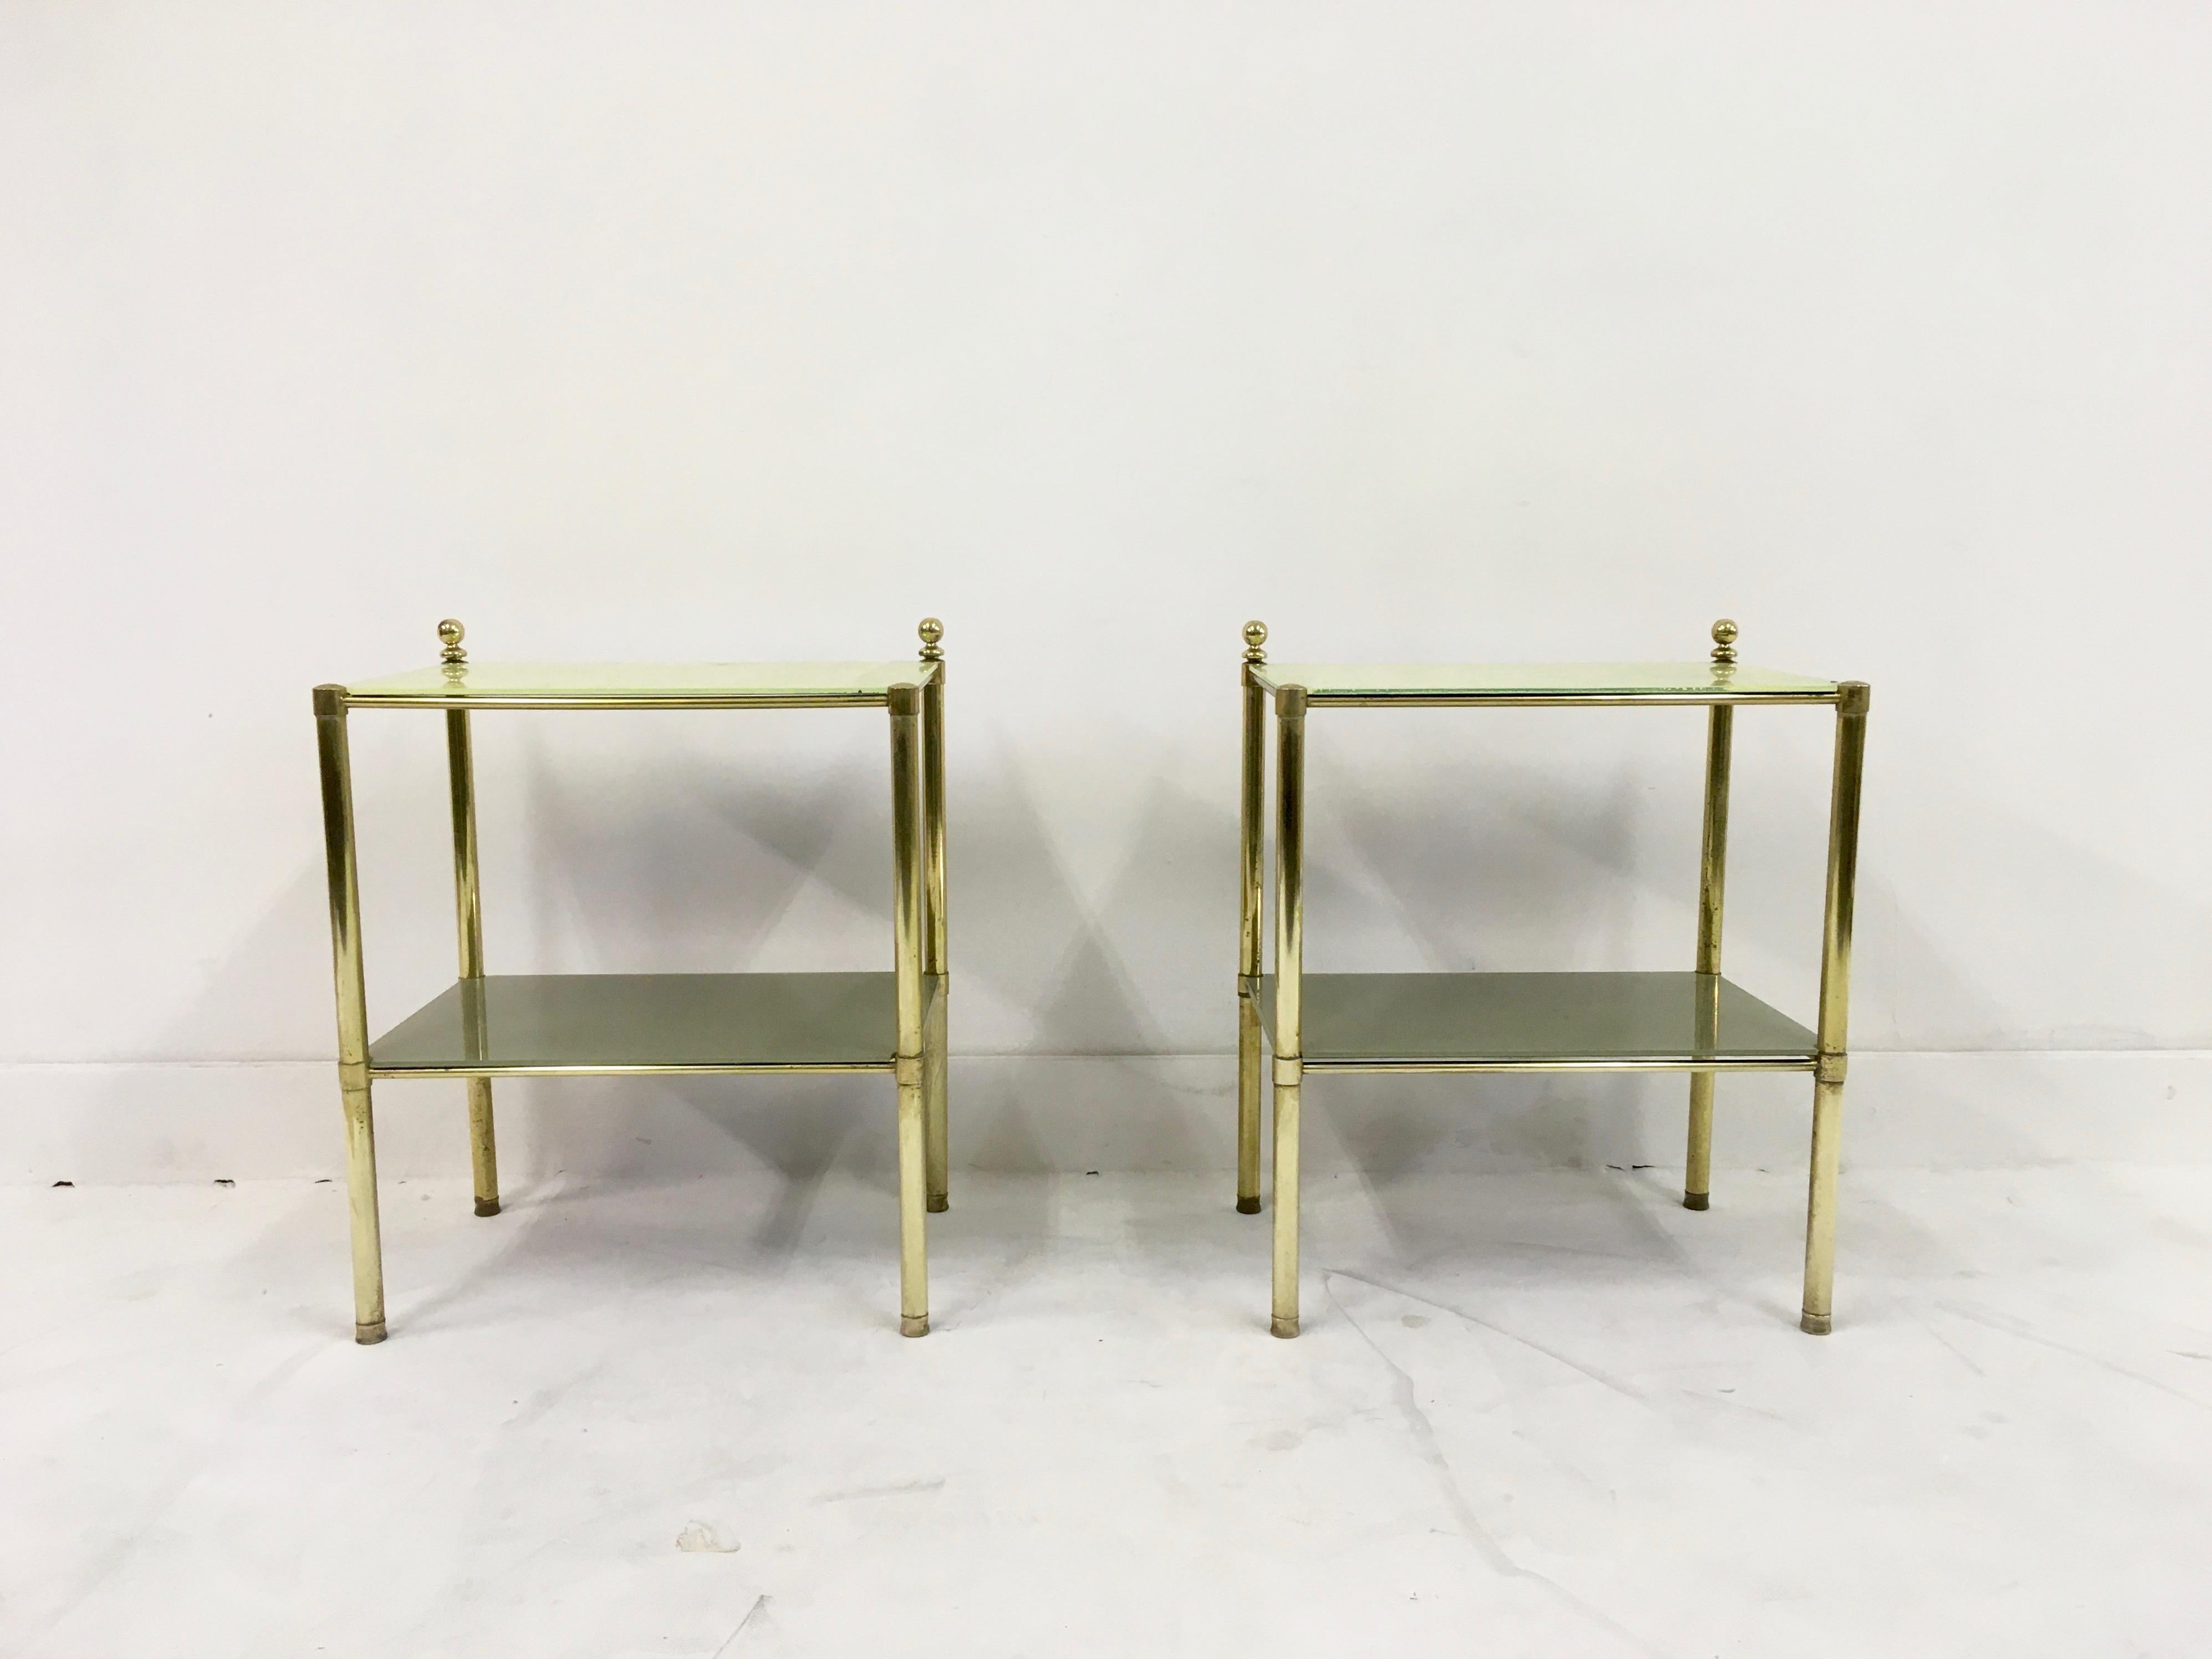 A pair of brass side tables

Or bedside tables

Yellow and grey glass

Two-tier

Italian, 1970s.